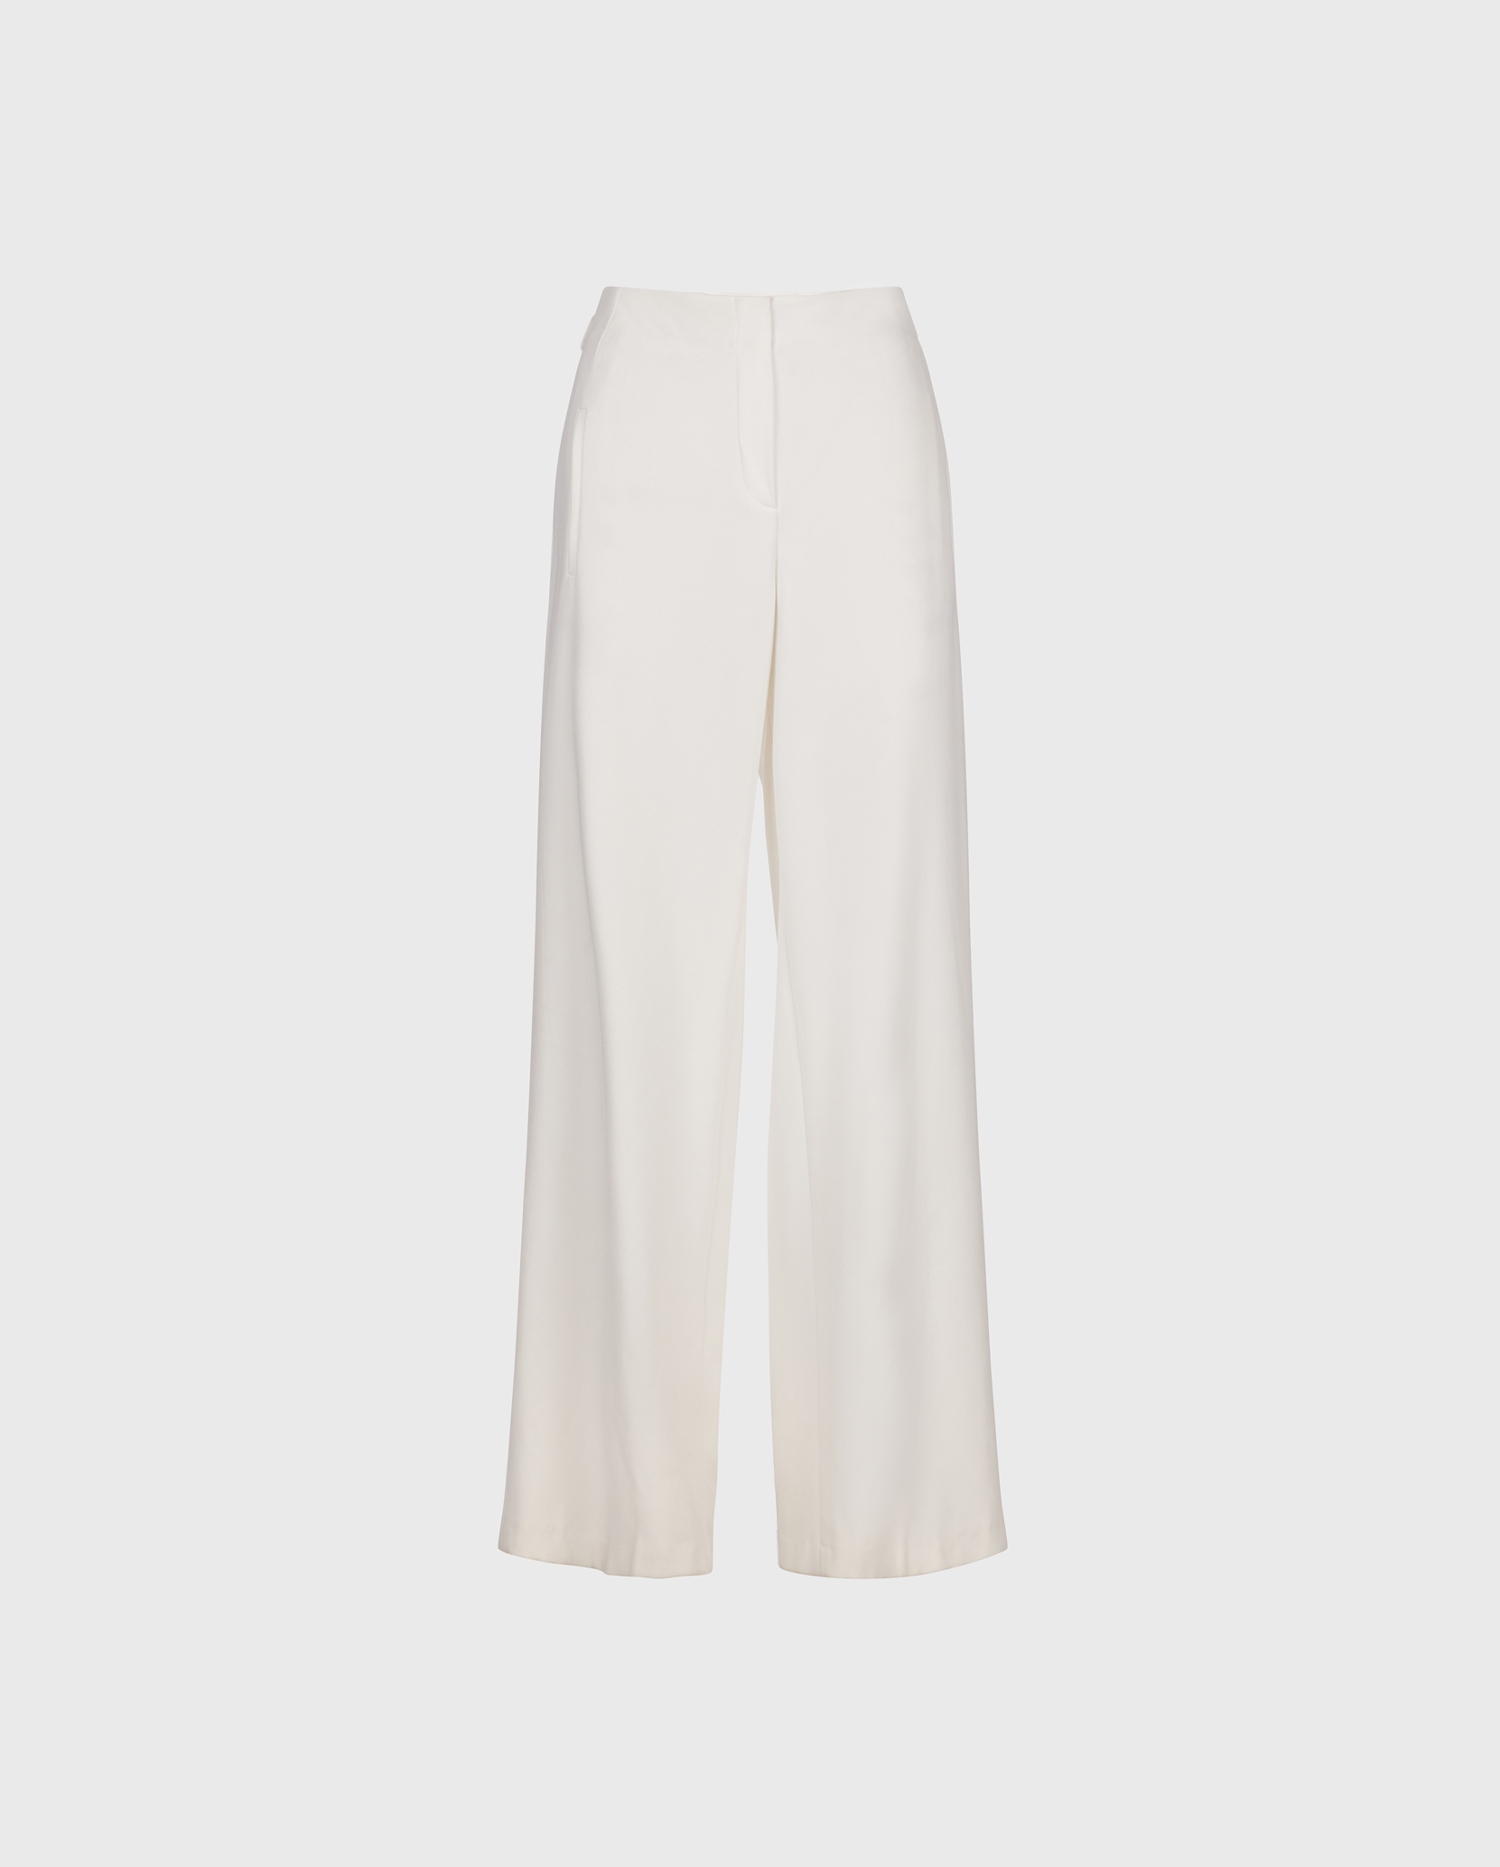 Discover the PRESTON Oversized wide-leg white pants from ANNE FONTAINE